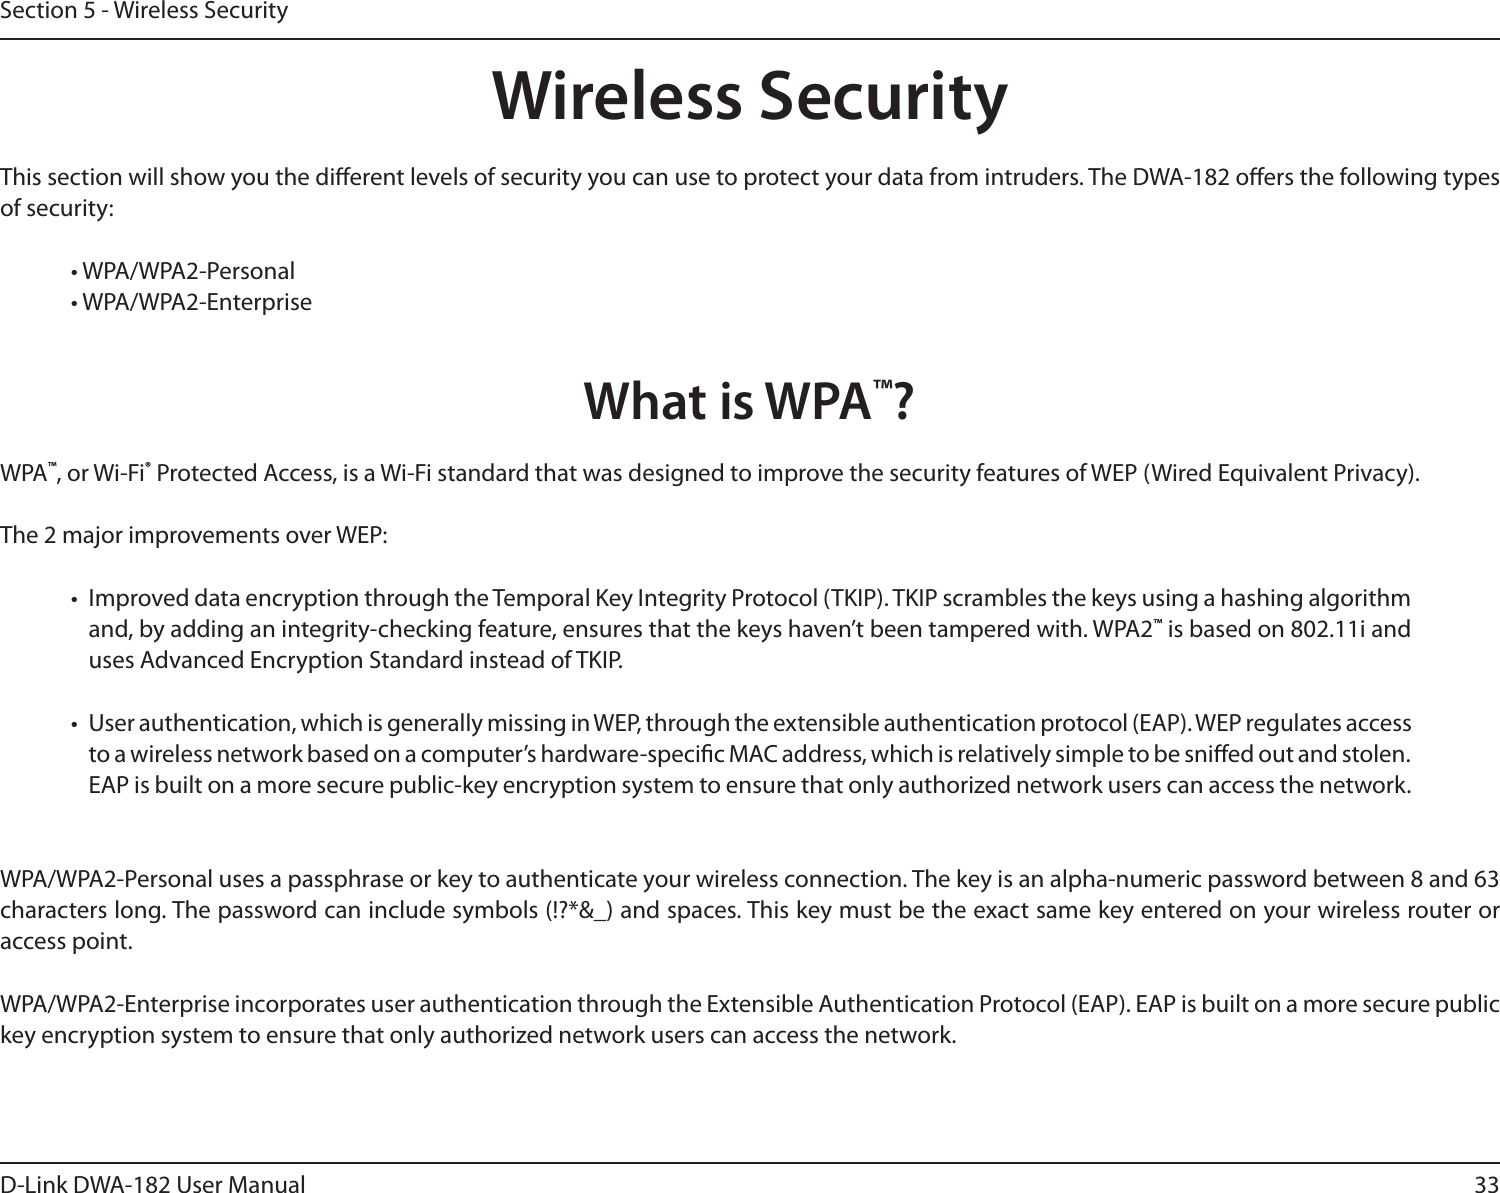 33D-Link DWA-182 User ManualSection 5 - Wireless SecurityWireless SecurityThis section will show you the dierent levels of security you can use to protect your data from intruders. The DWA-182 oers the following types of security:• WPA/WPA2-Personal    • WPA/WPA2-EnterpriseWhat is WPA™?WPA™, or Wi-Fi® Protected Access, is a Wi-Fi standard that was designed to improve the security features of WEP (Wired Equivalent Privacy).  The 2 major improvements over WEP: •  Improved data encryption through the Temporal Key Integrity Protocol (TKIP). TKIP scrambles the keys using a hashing algorithm and, by adding an integrity-checking feature, ensures that the keys haven’t been tampered with. WPA2™ is based on 802.11i and uses Advanced Encryption Standard instead of TKIP.•  User authentication, which is generally missing in WEP, through the extensible authentication protocol (EAP). WEP regulates access to a wireless network based on a computer’s hardware-specic MAC address, which is relatively simple to be snied out and stolen. EAP is built on a more secure public-key encryption system to ensure that only authorized network users can access the network.WPA/WPA2-Personal uses a passphrase or key to authenticate your wireless connection. The key is an alpha-numeric password between 8 and 63 characters long. The password can include symbols (!?*&amp;_) and spaces. This key must be the exact same key entered on your wireless router or access point.WPA/WPA2-Enterprise incorporates user authentication through the Extensible Authentication Protocol (EAP). EAP is built on a more secure public key encryption system to ensure that only authorized network users can access the network.